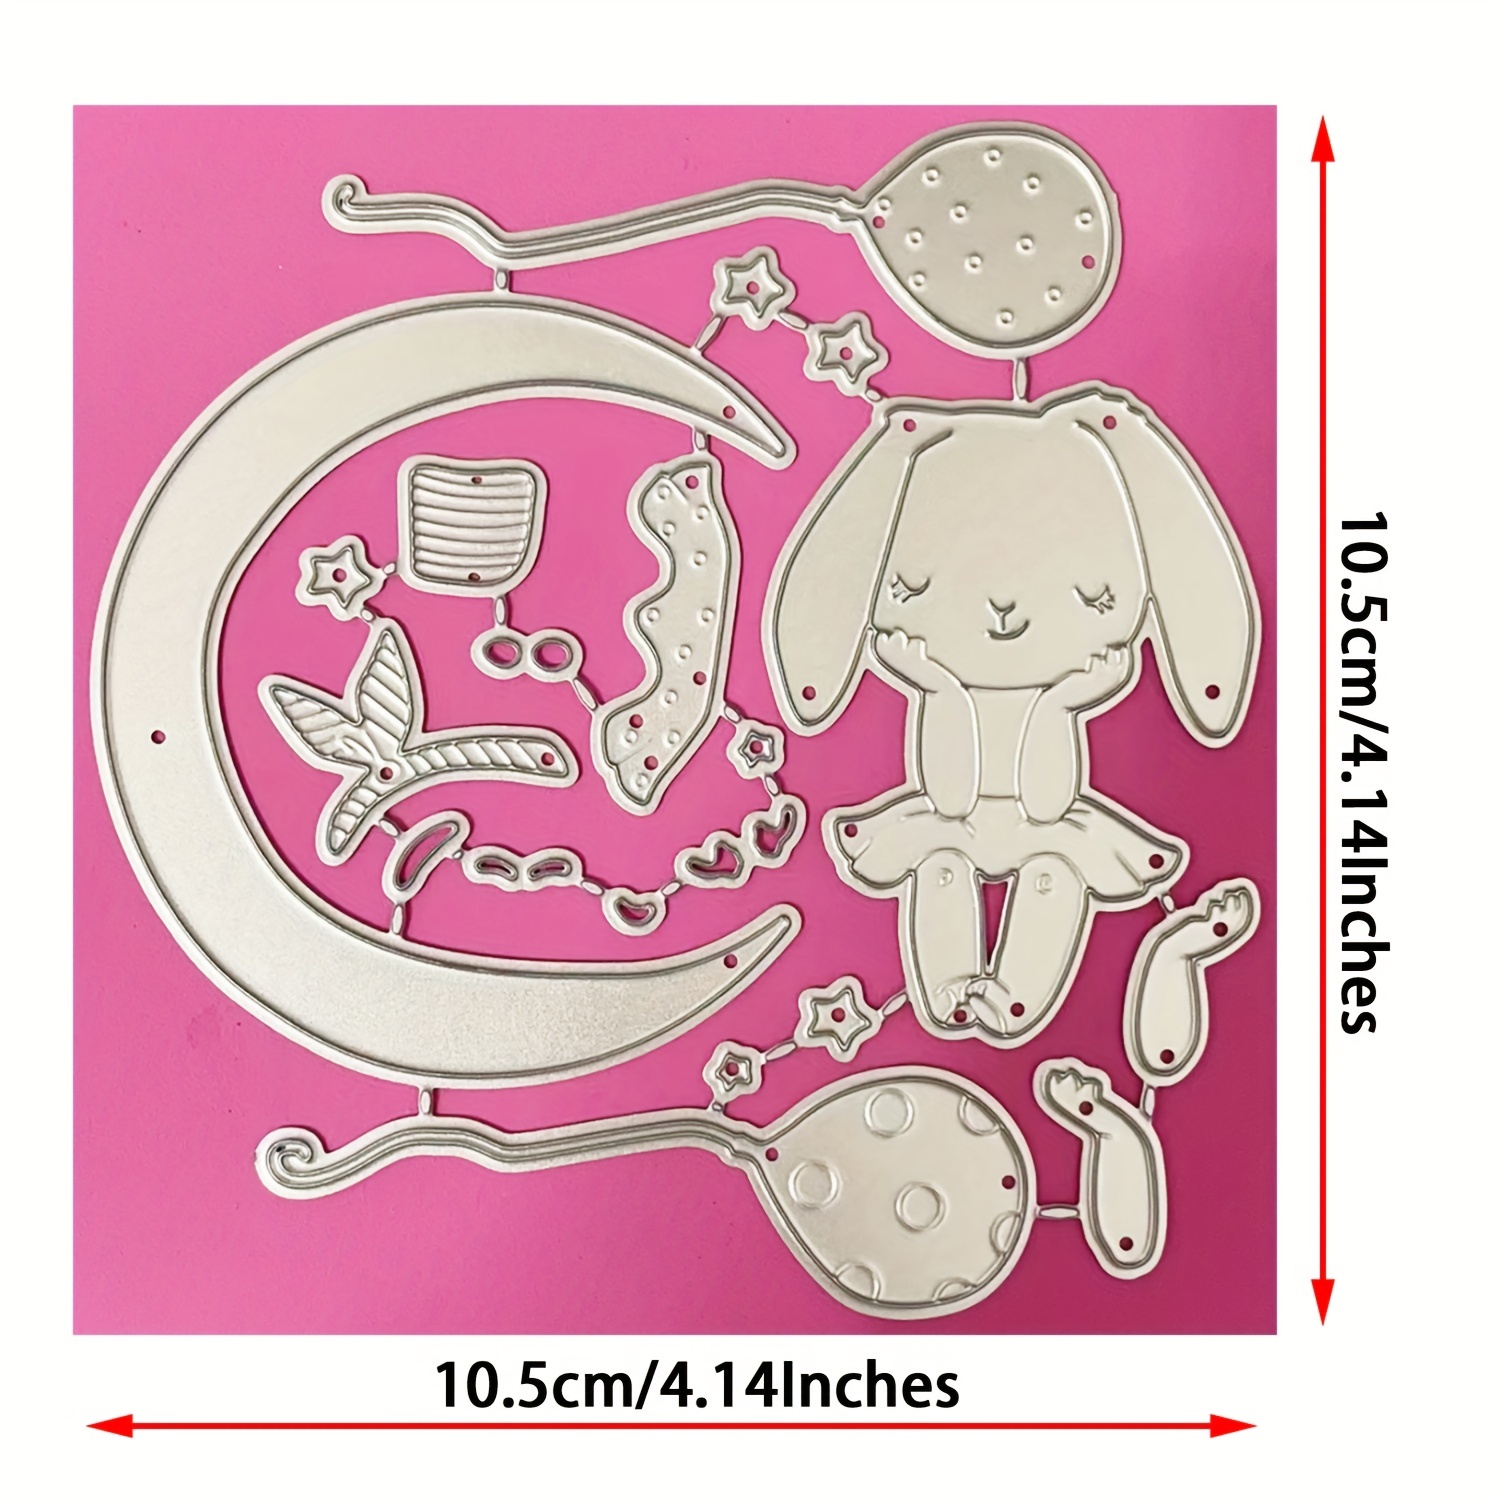 Easter Egg Bunny Die Cuts Handmade Decoration Stencils, Rabbit Metal Cutting Dies for Kids Beginners Party Birthday Arts Craft DIY Project, Kids